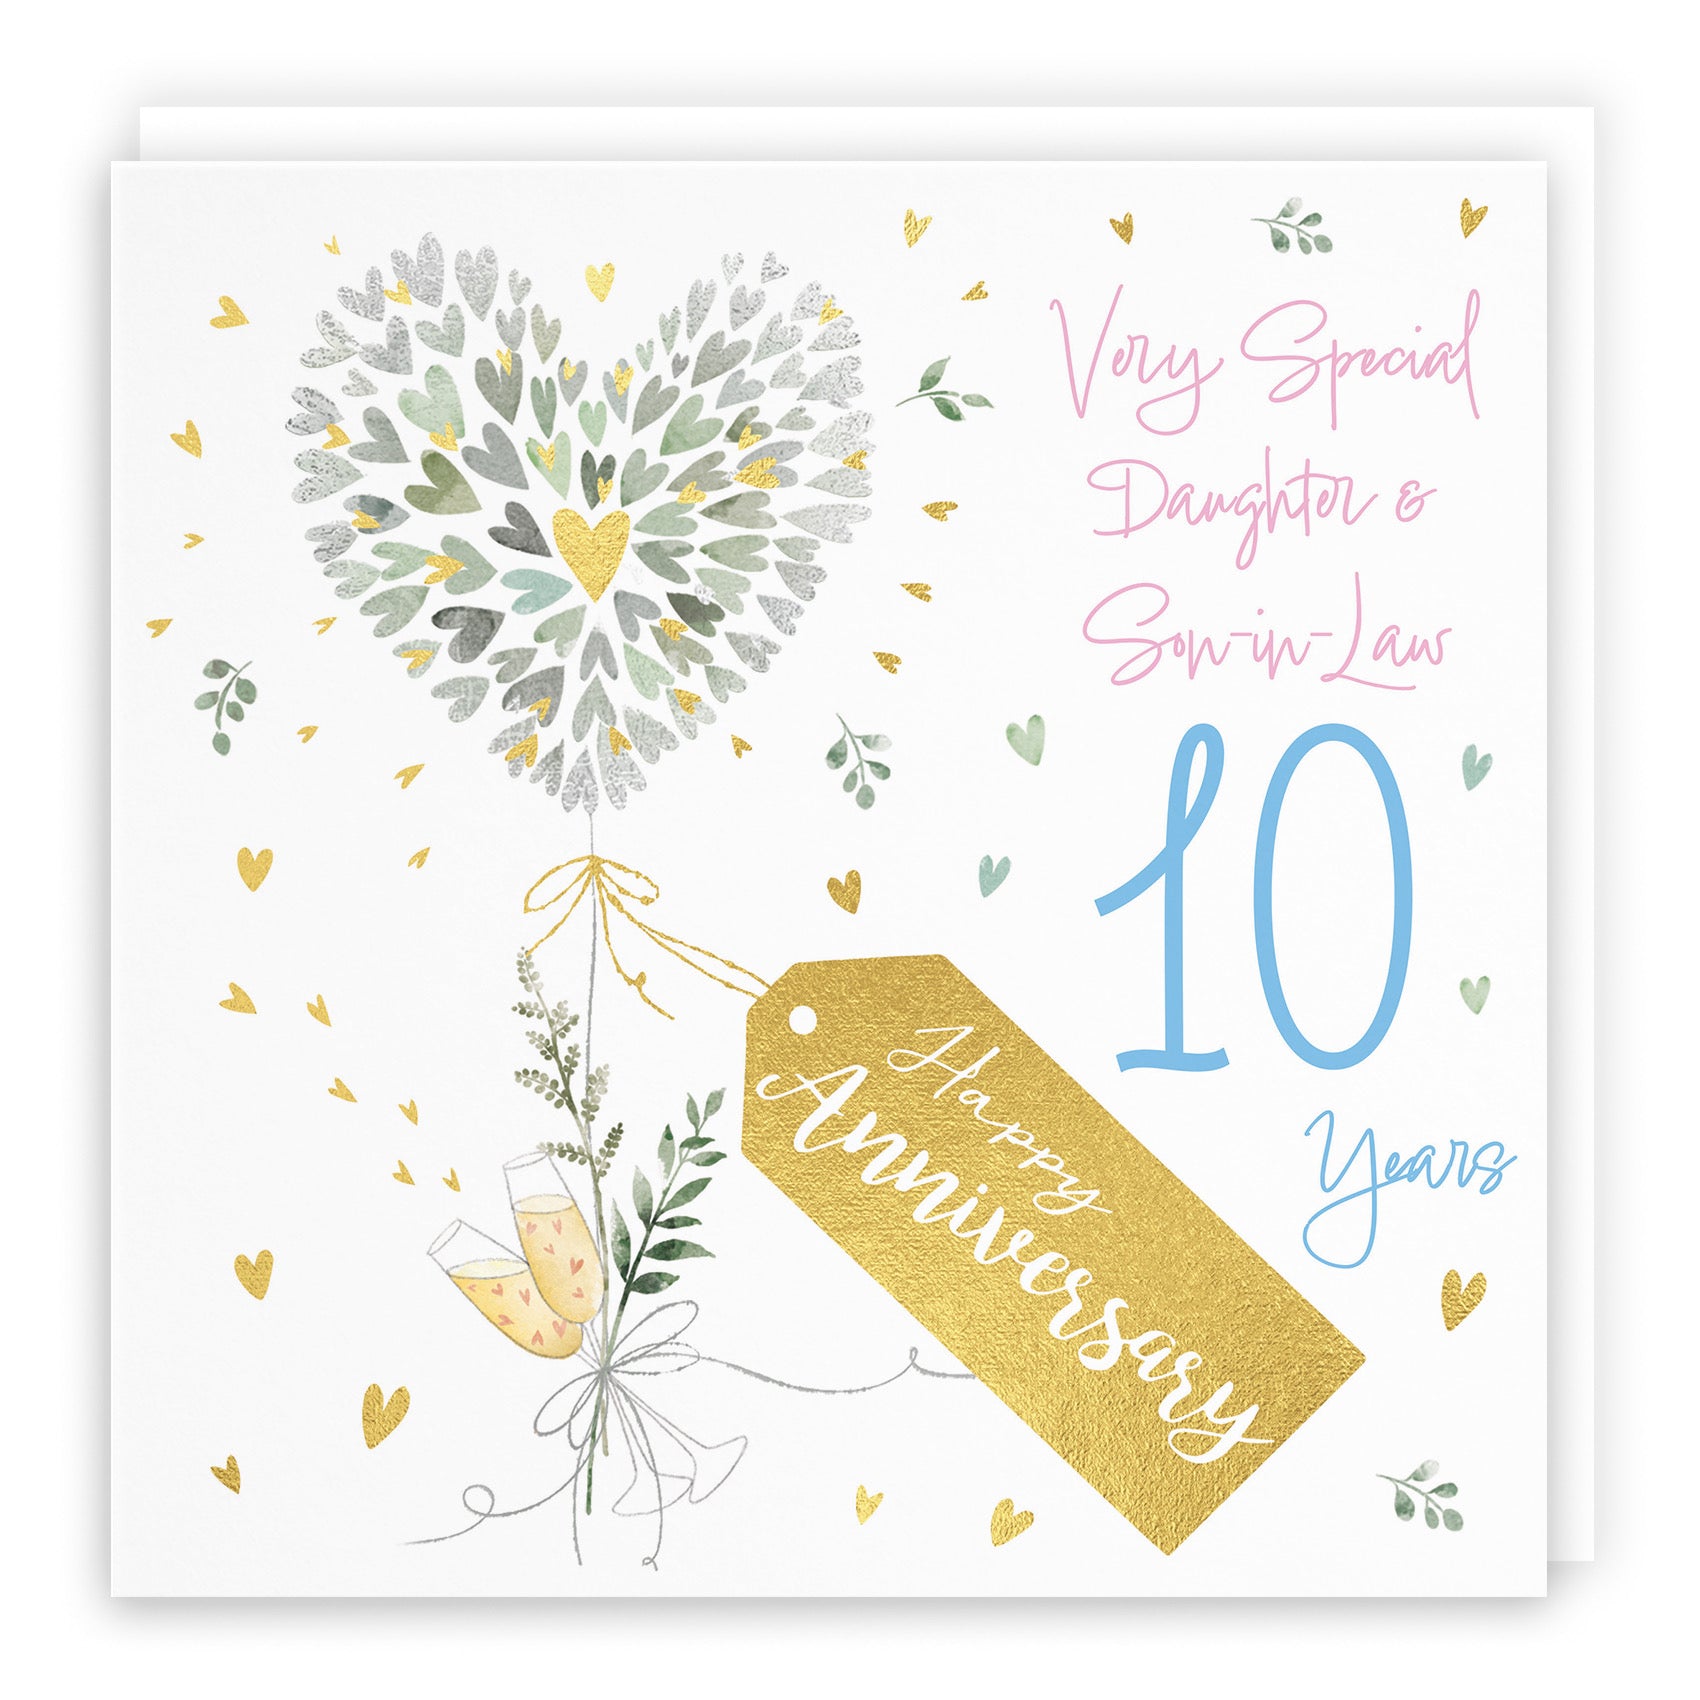 Daughter And Son-in-Law 10th Anniversary Card Contemporary Hearts Milo's Gallery - Default Title (B0CKJ5ZPY3)